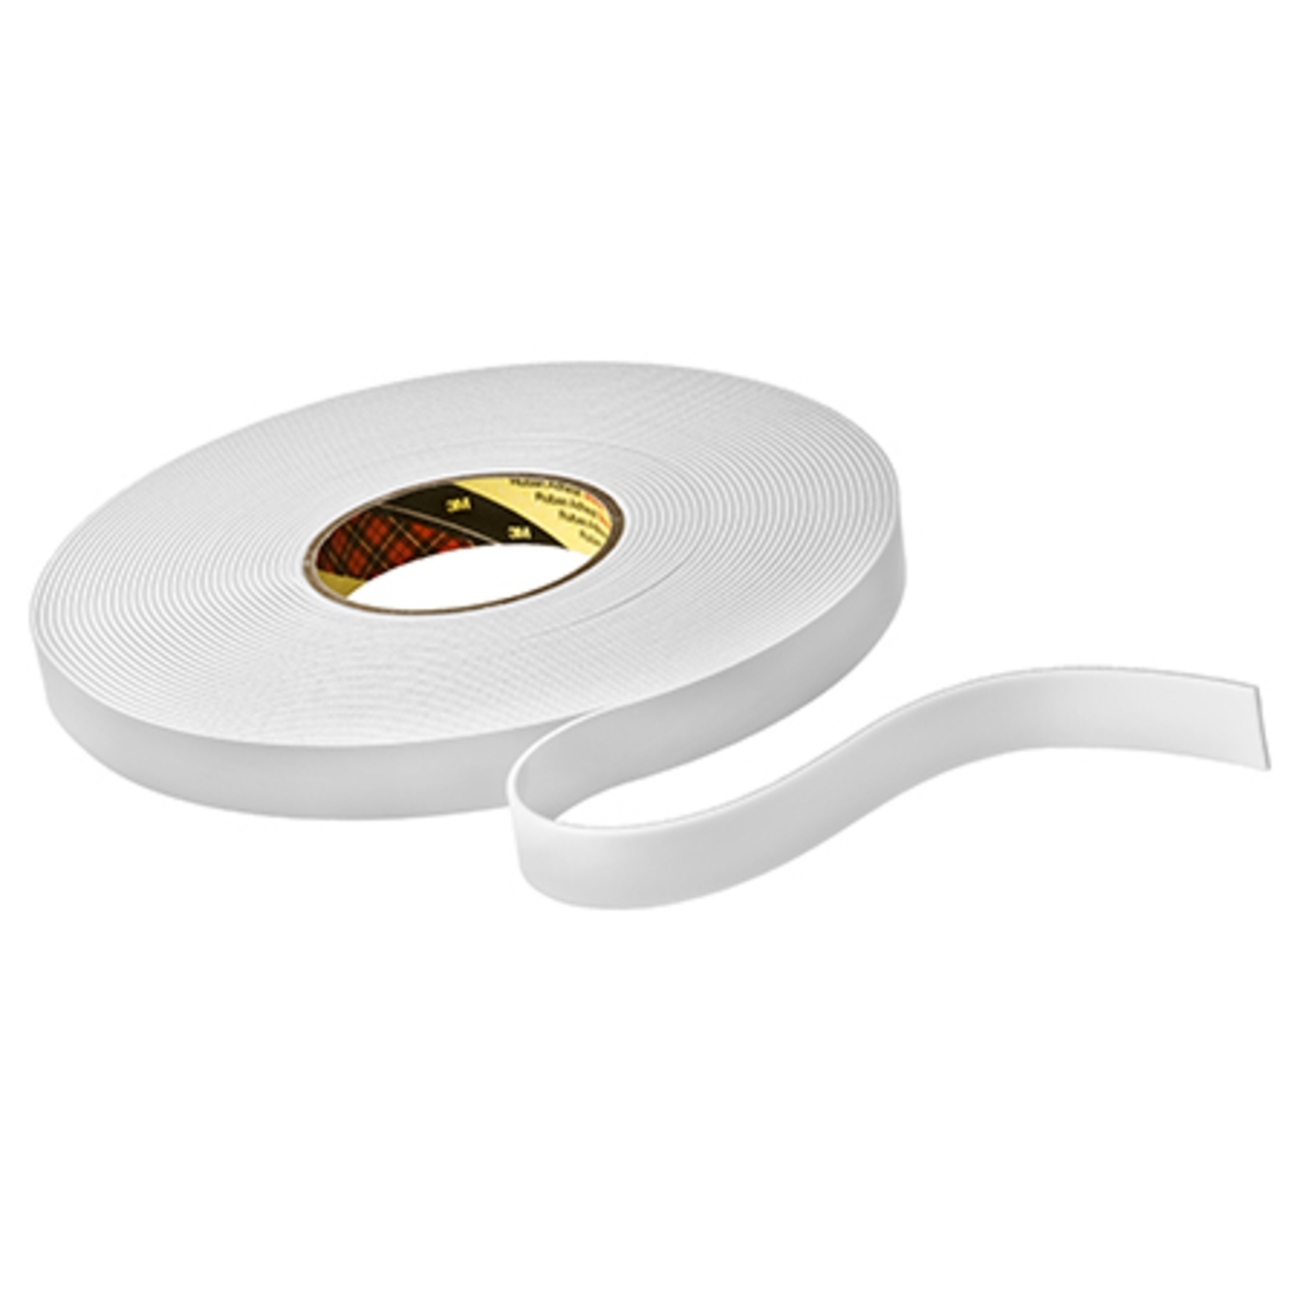 3M Double-sided PE foam tape with acrylic adhesive 9515W, white, 15 mm x 33 m, 1.5 mm